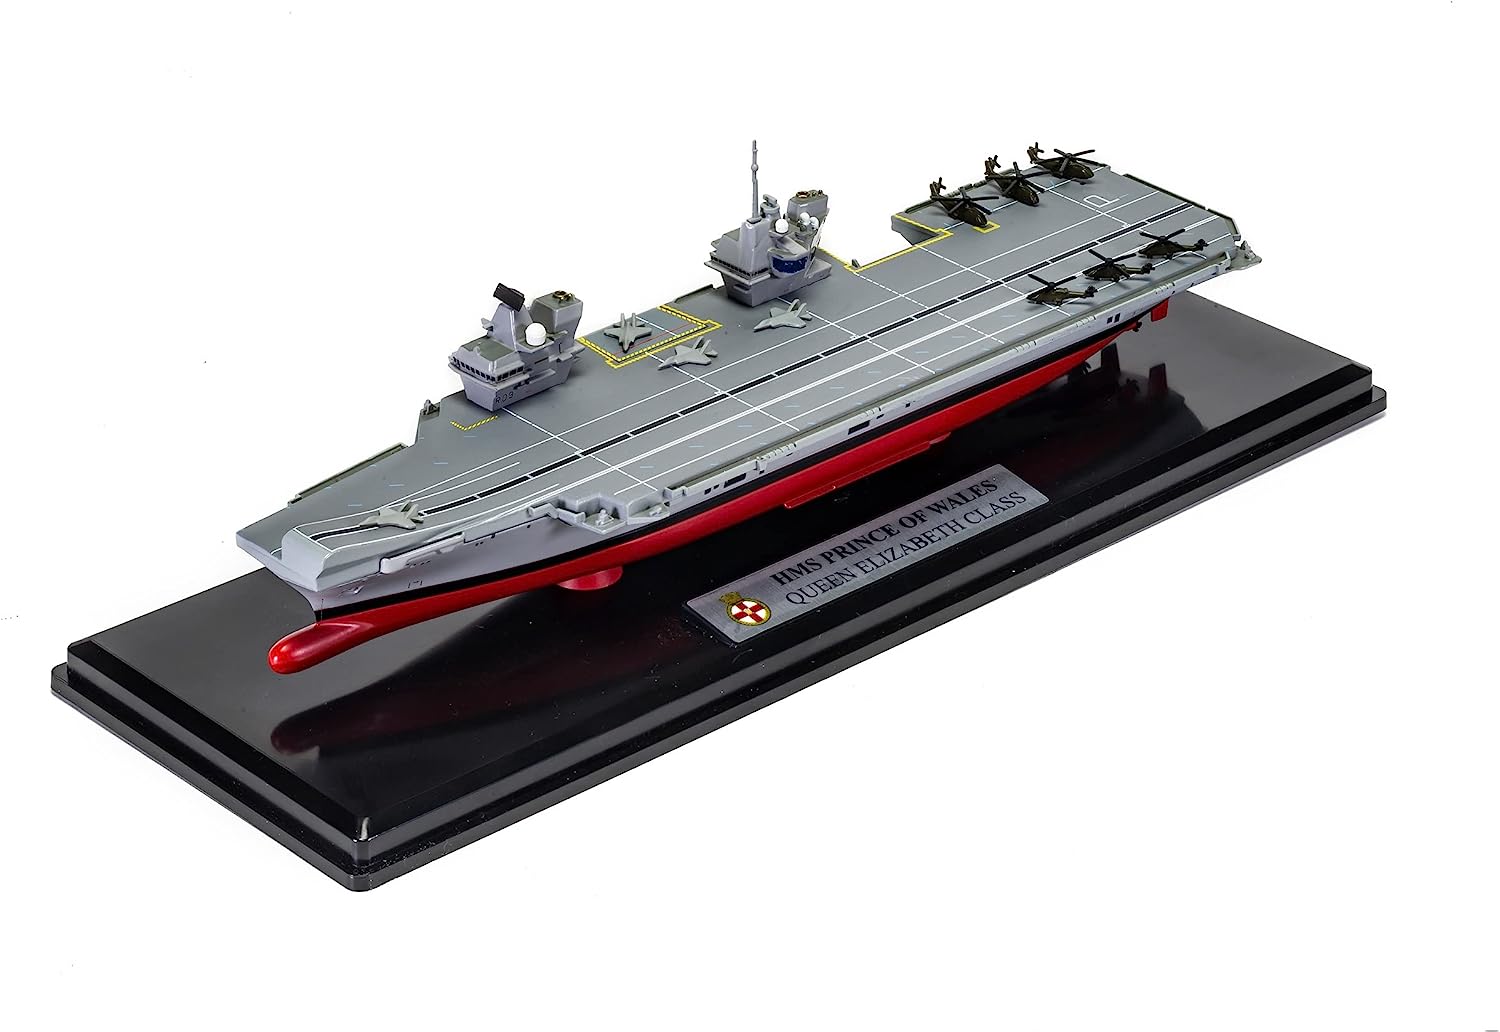 ALDO Creative Arts Collectibles Scale Model HMS Prince Of Wales Queen Elizabeth Class Aircraft Carrier Ship Model Assembled